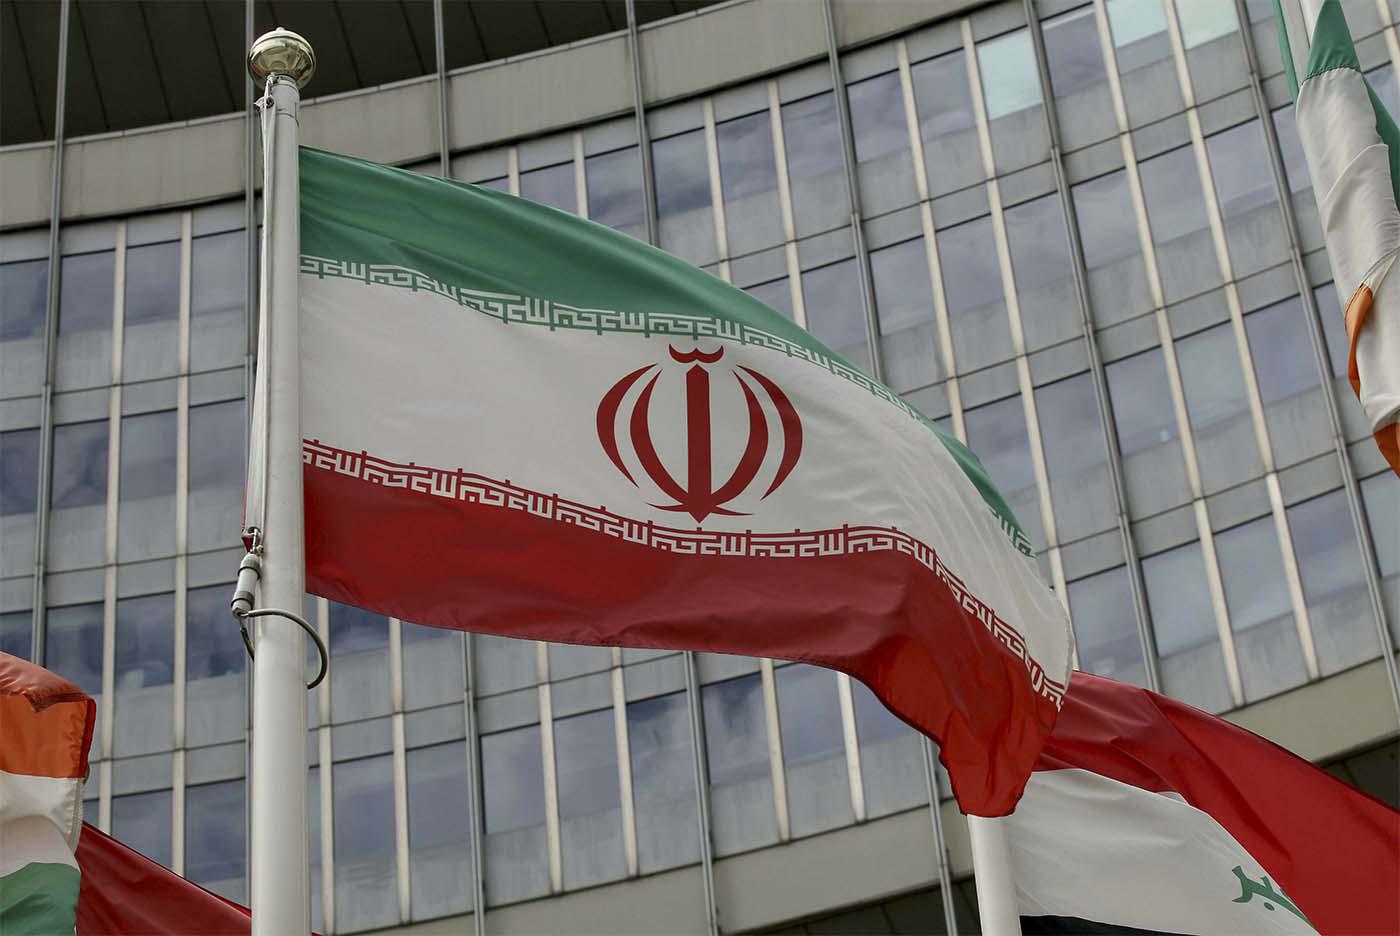 Europe can play a key role in facilitating talks between Iran and the United States